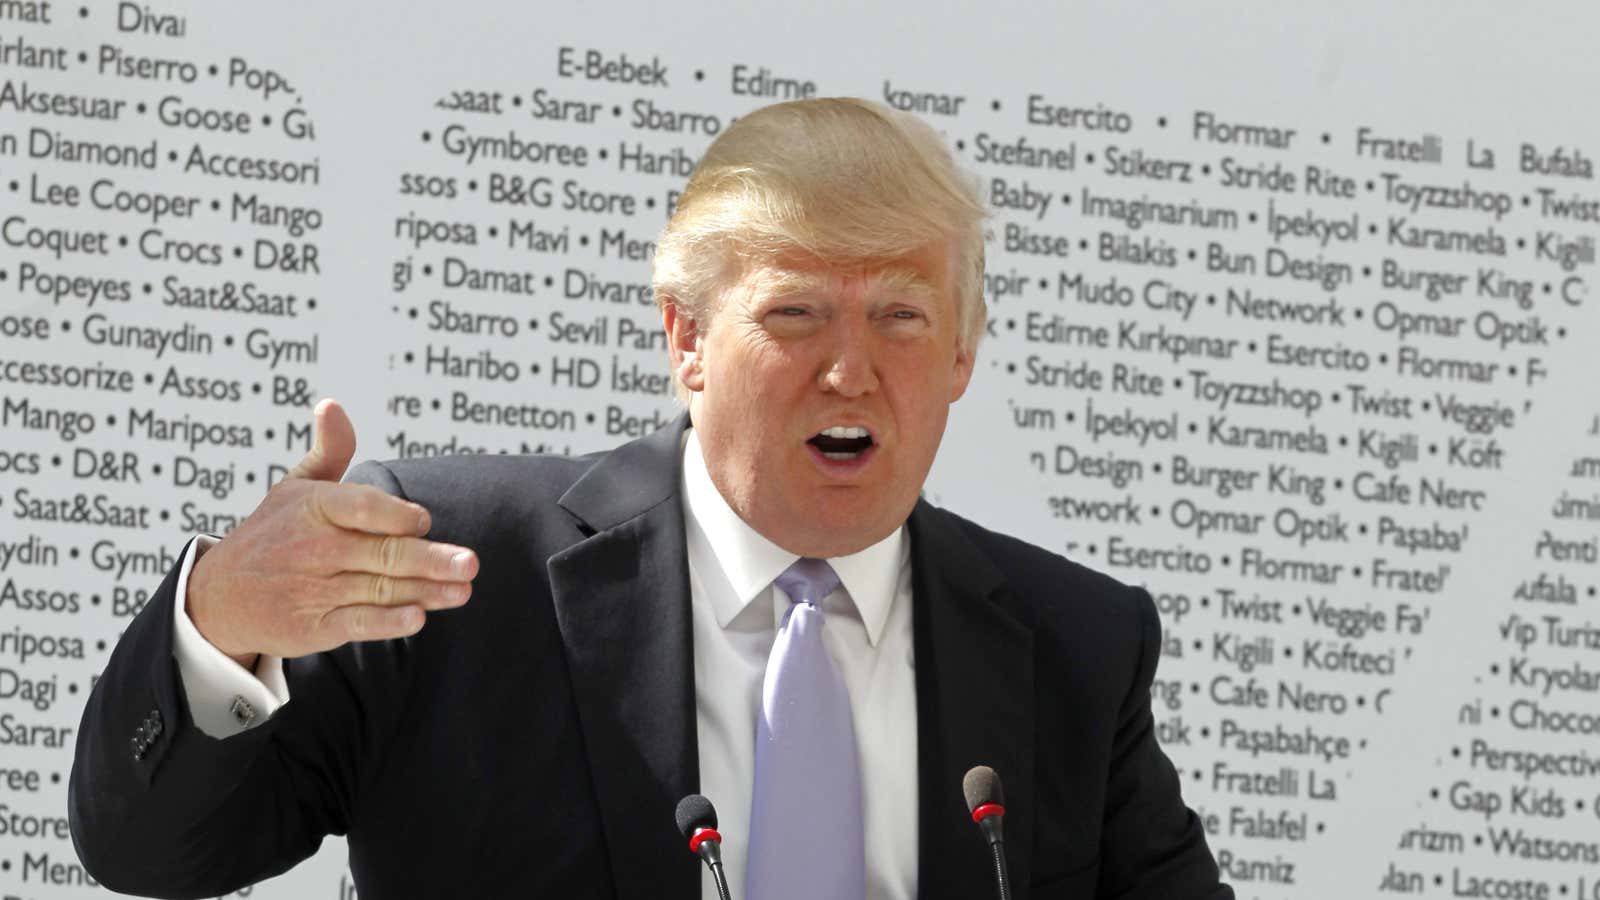 Donald Trump speaks during a news conference during the opening of the Trump Towers Mall in Istanbul.